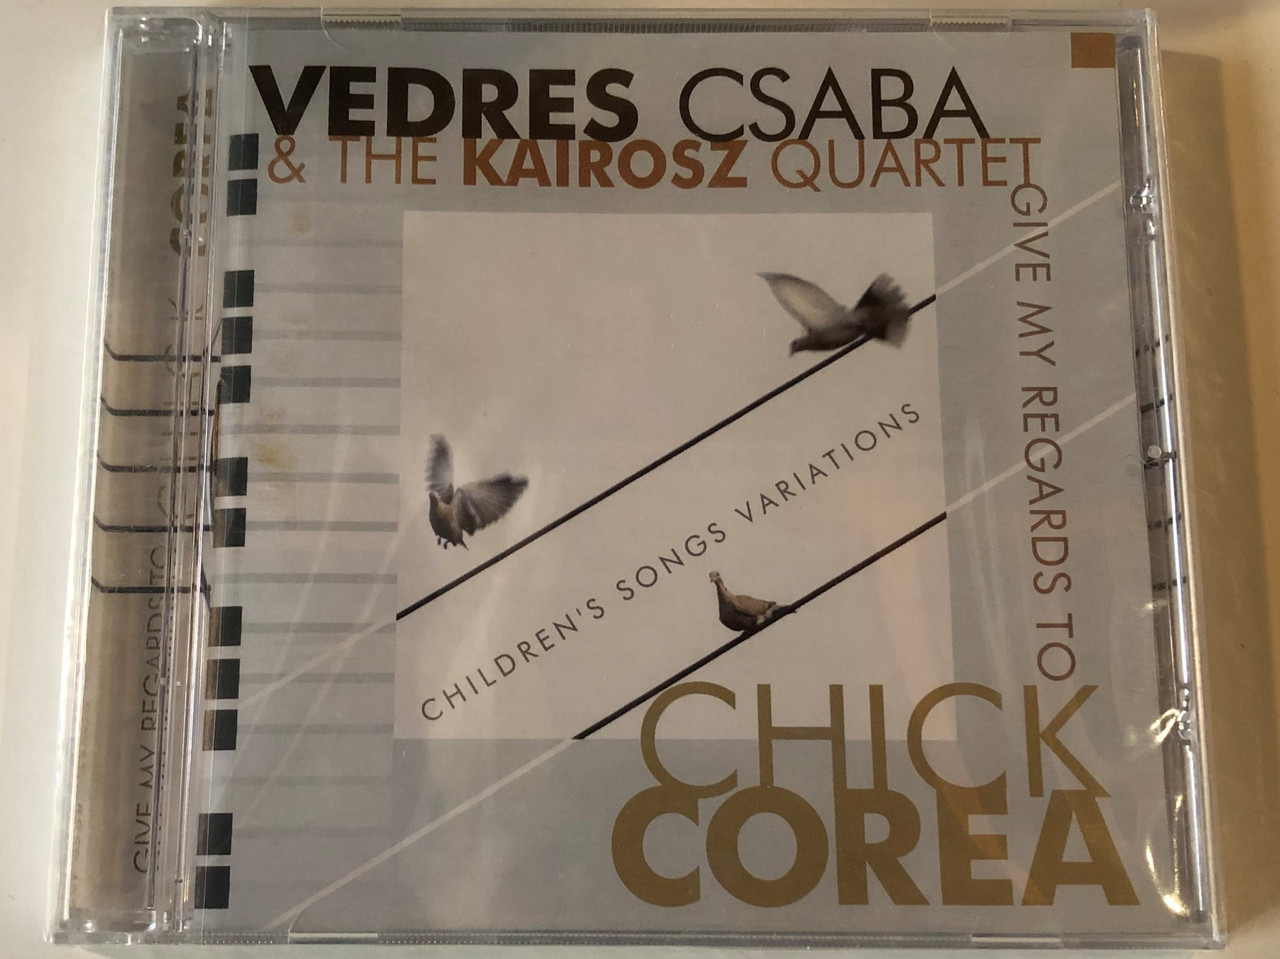 Vedres Csaba  The Kairosz Quartet ‎– Give My Regards To Chick Corea  (Children's Songs Variations) Periferic Records ‎Audio CD 2006 BGCD 186  Bible in My Language